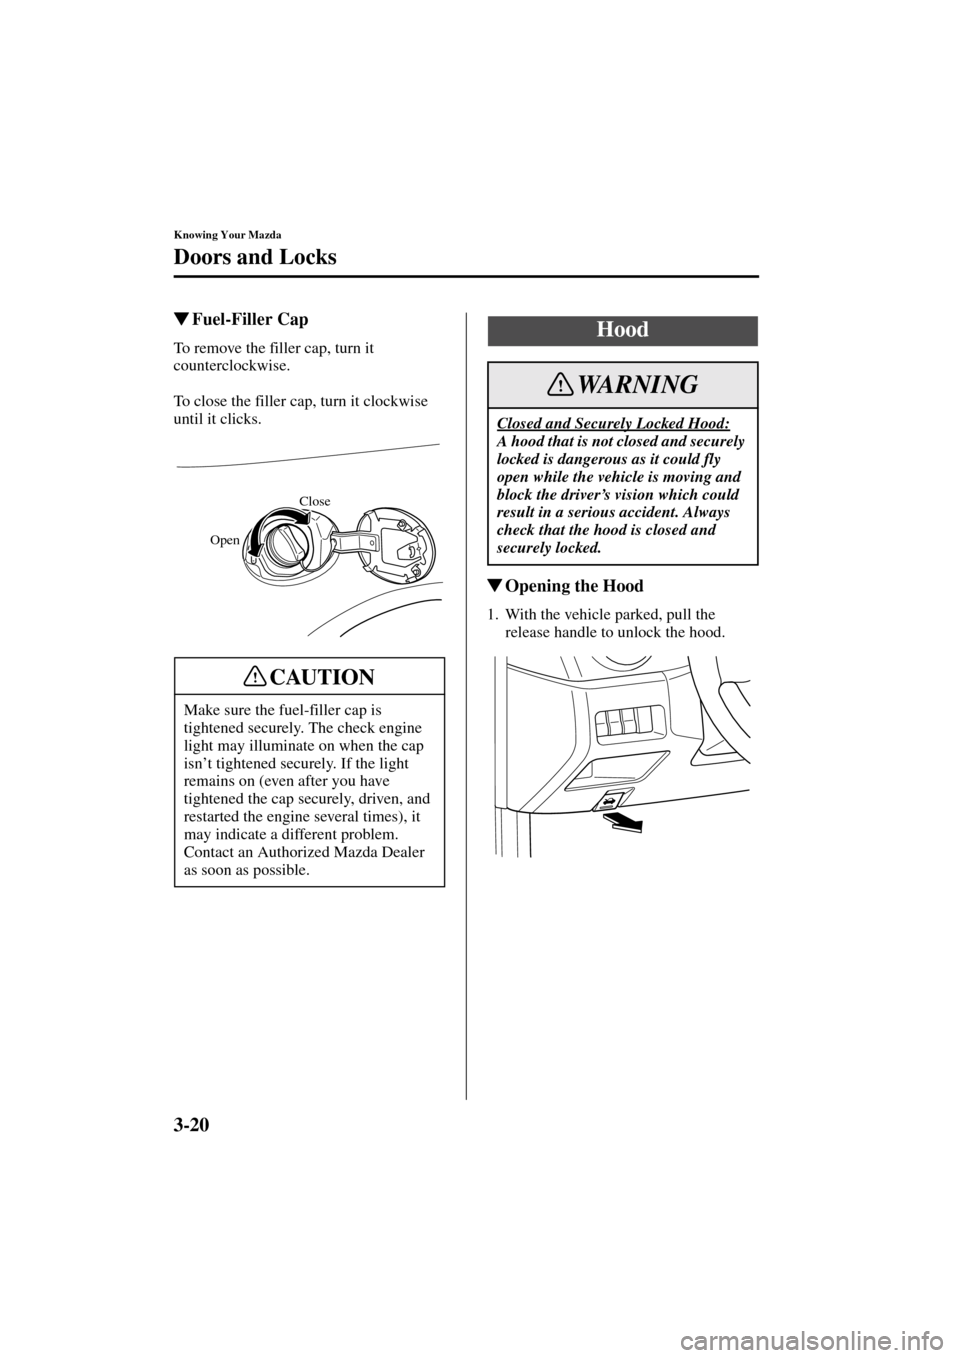 MAZDA MODEL 3 HATCHBACK 2004  Owners Manual (in English) 3-20
Knowing Your Mazda
Doors and Locks
Form No. 8S18-EA-03I
Fuel-Filler Cap
To remove the filler cap, turn it 
counterclockwise.
To close the filler cap, turn it clockwise 
until it clicks.
Opening